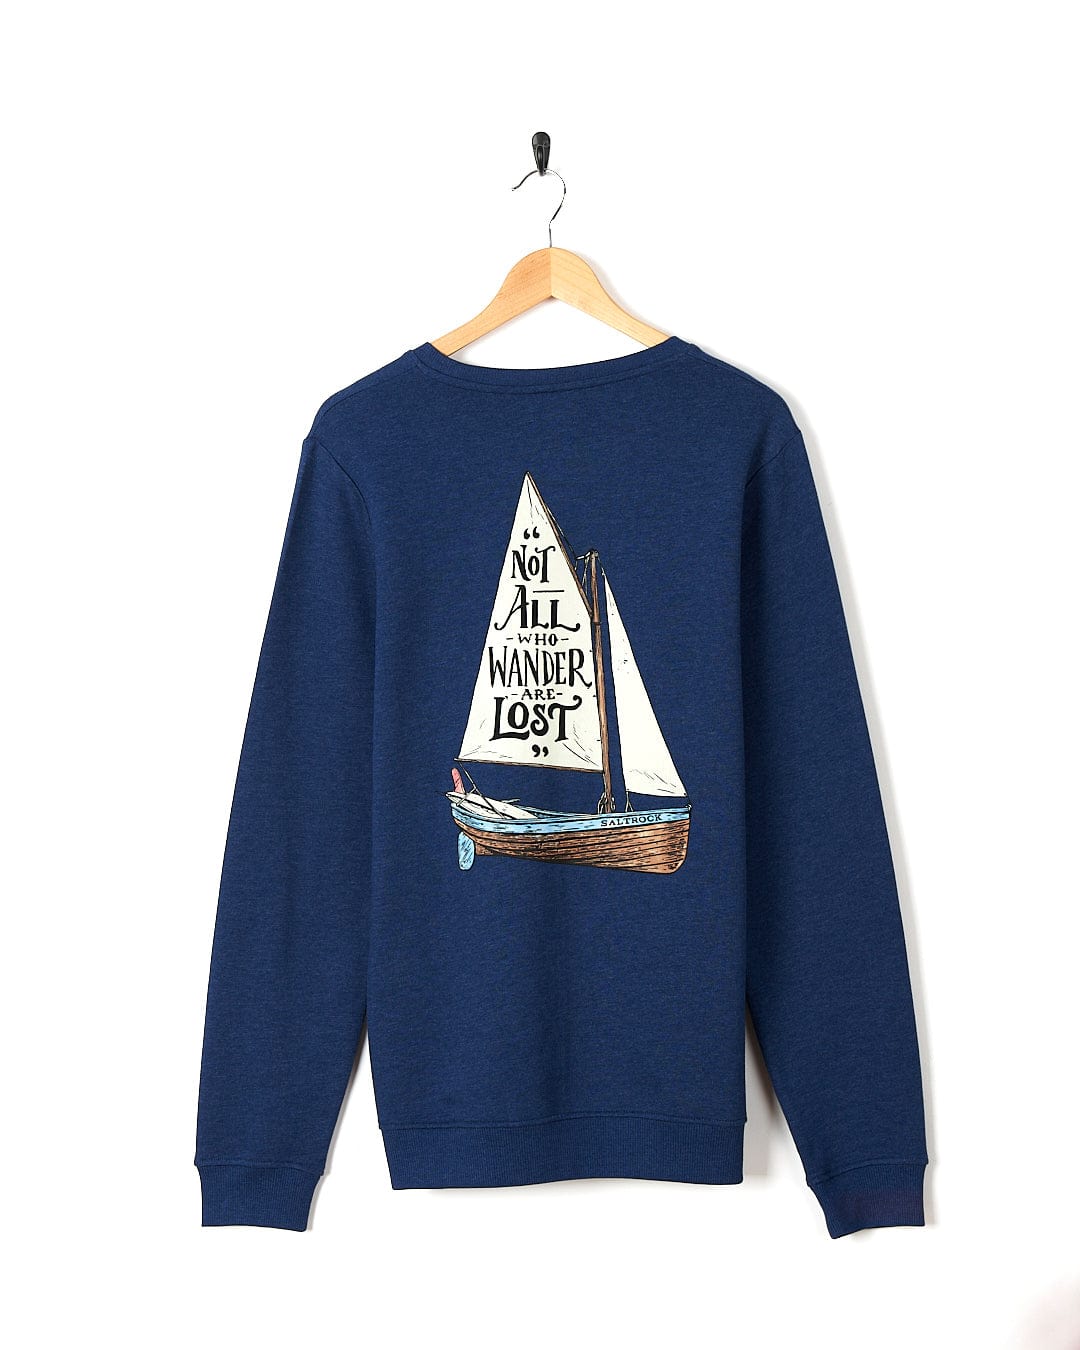 A Lost Ships - Mens Crew Sweat - Dark Blue with a sailboat on it.